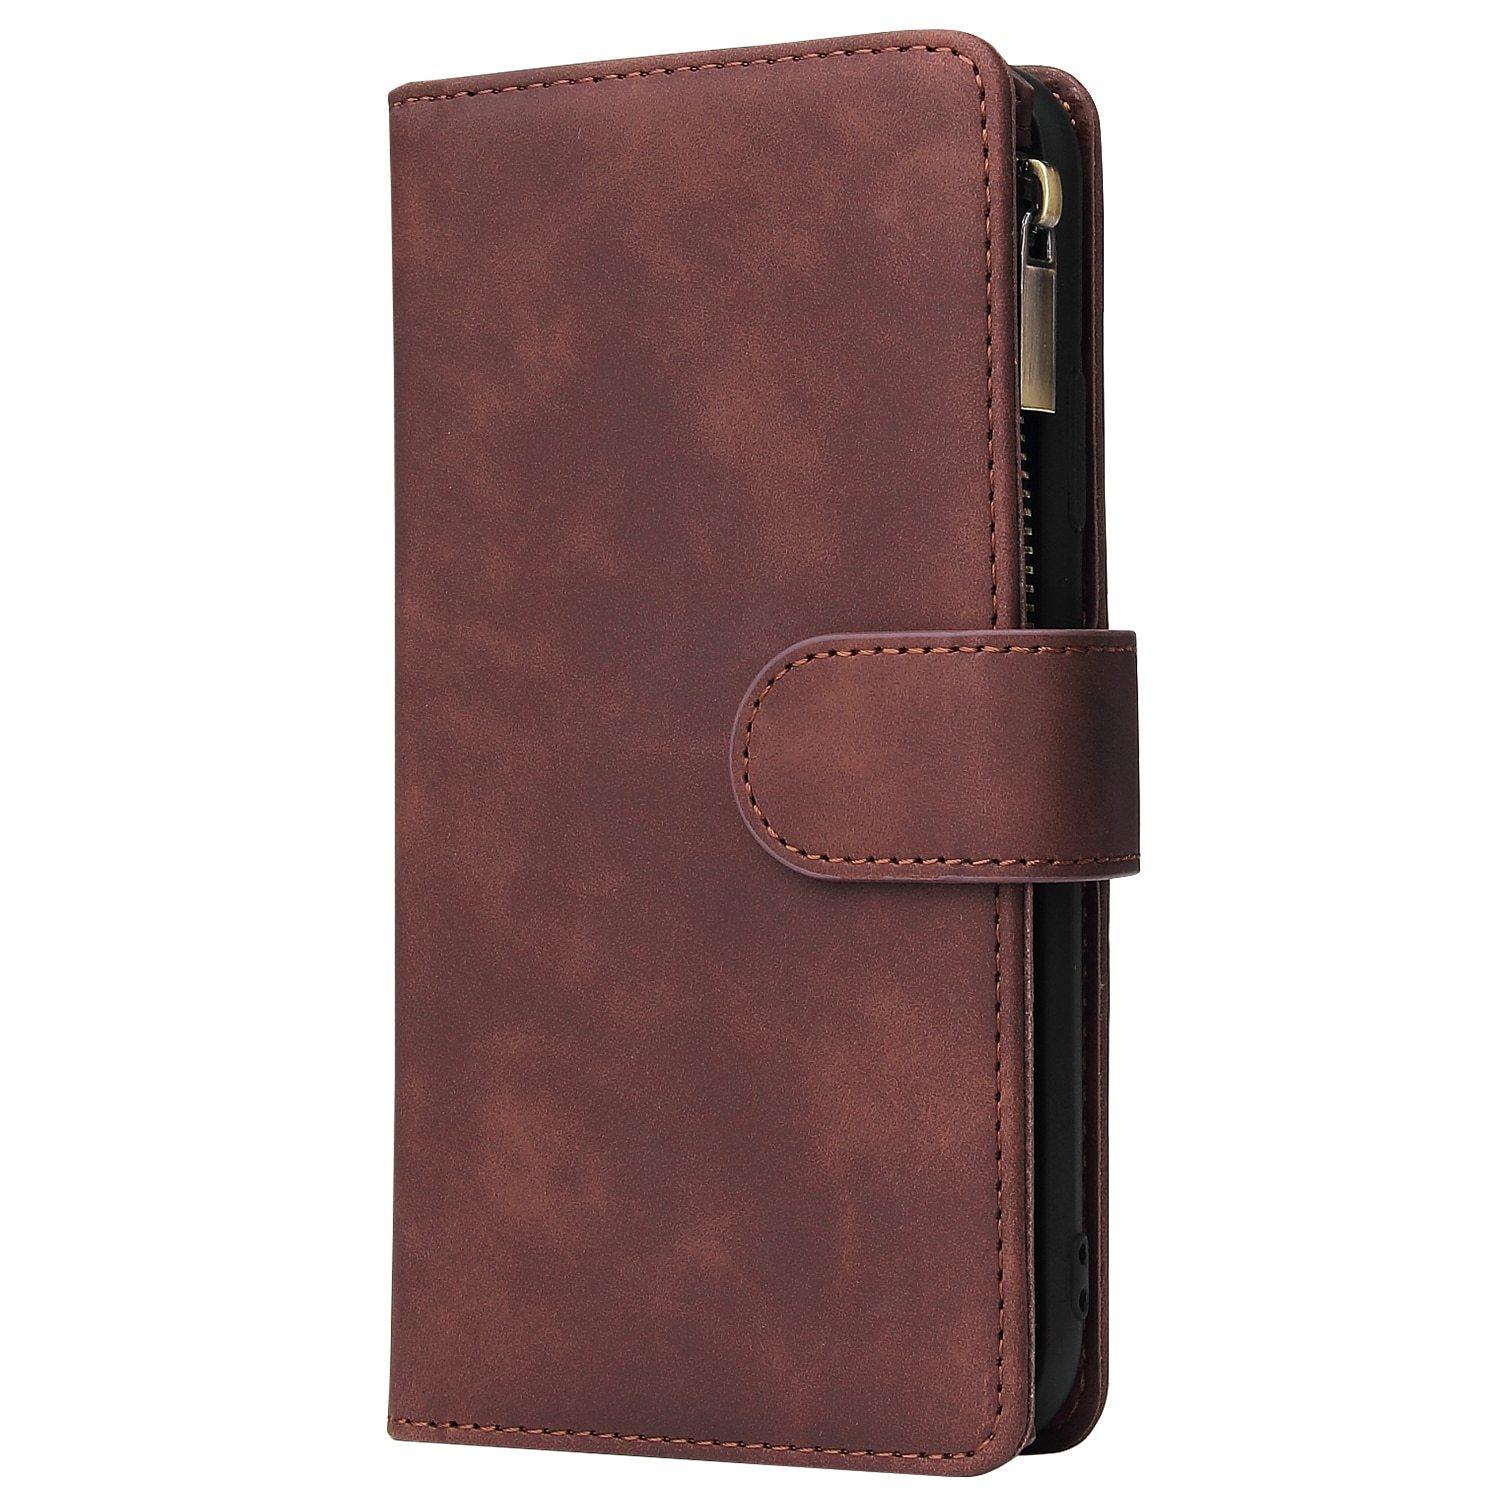 Zipper Wallet Leather Mobile Phone Case Hand Purse Bag For iPhone - PhoneWalletCases.com